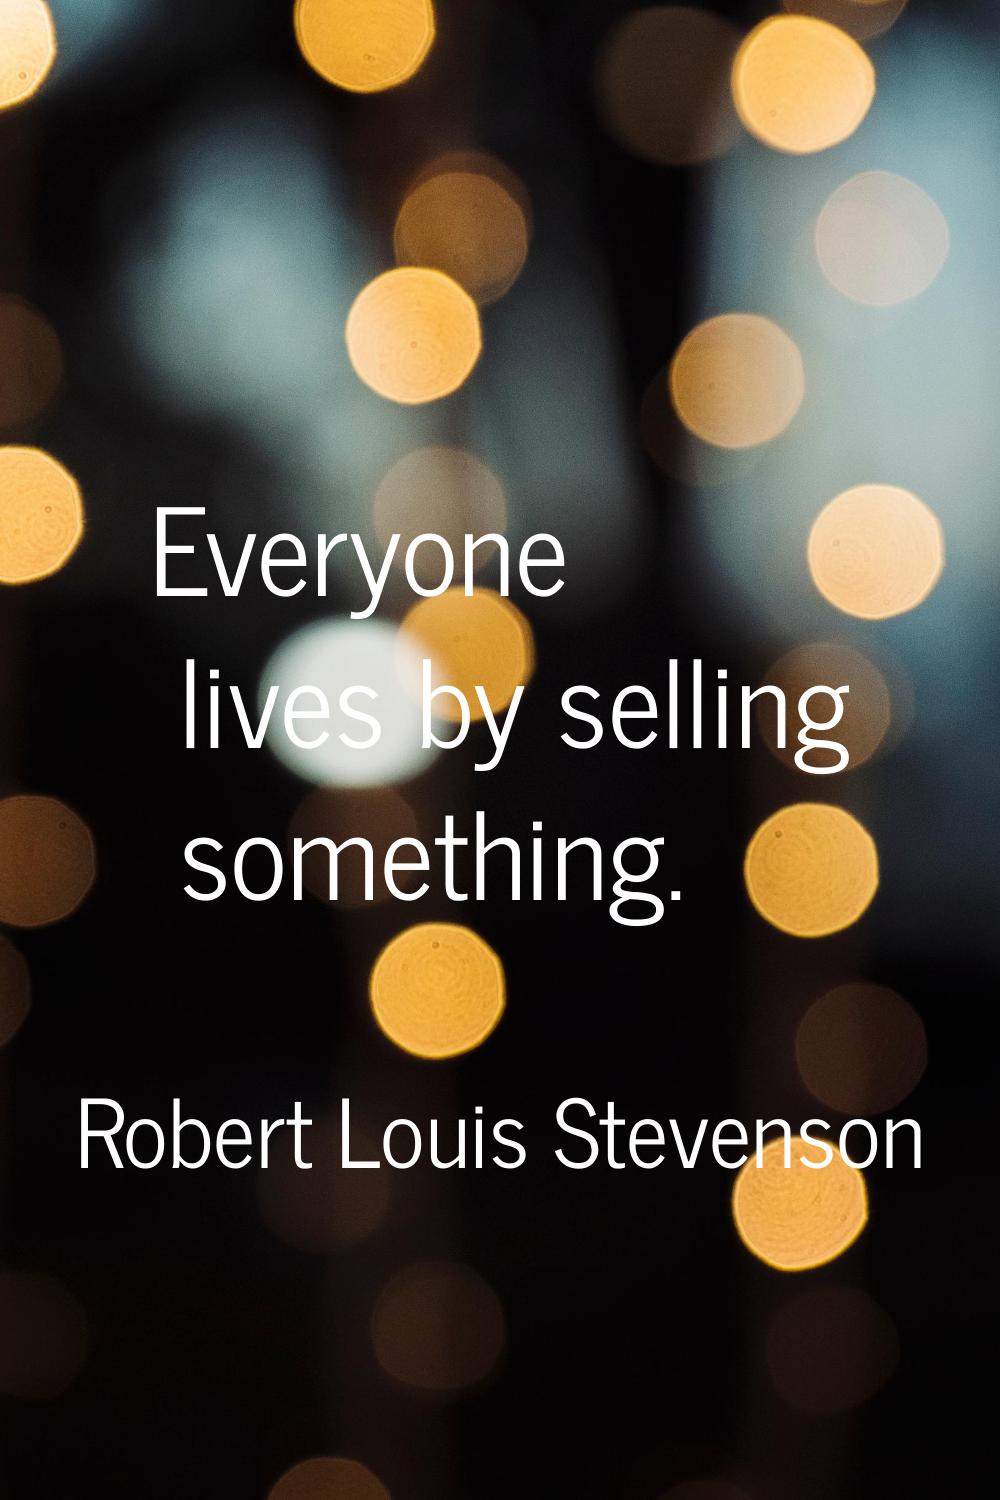 Everyone lives by selling something.